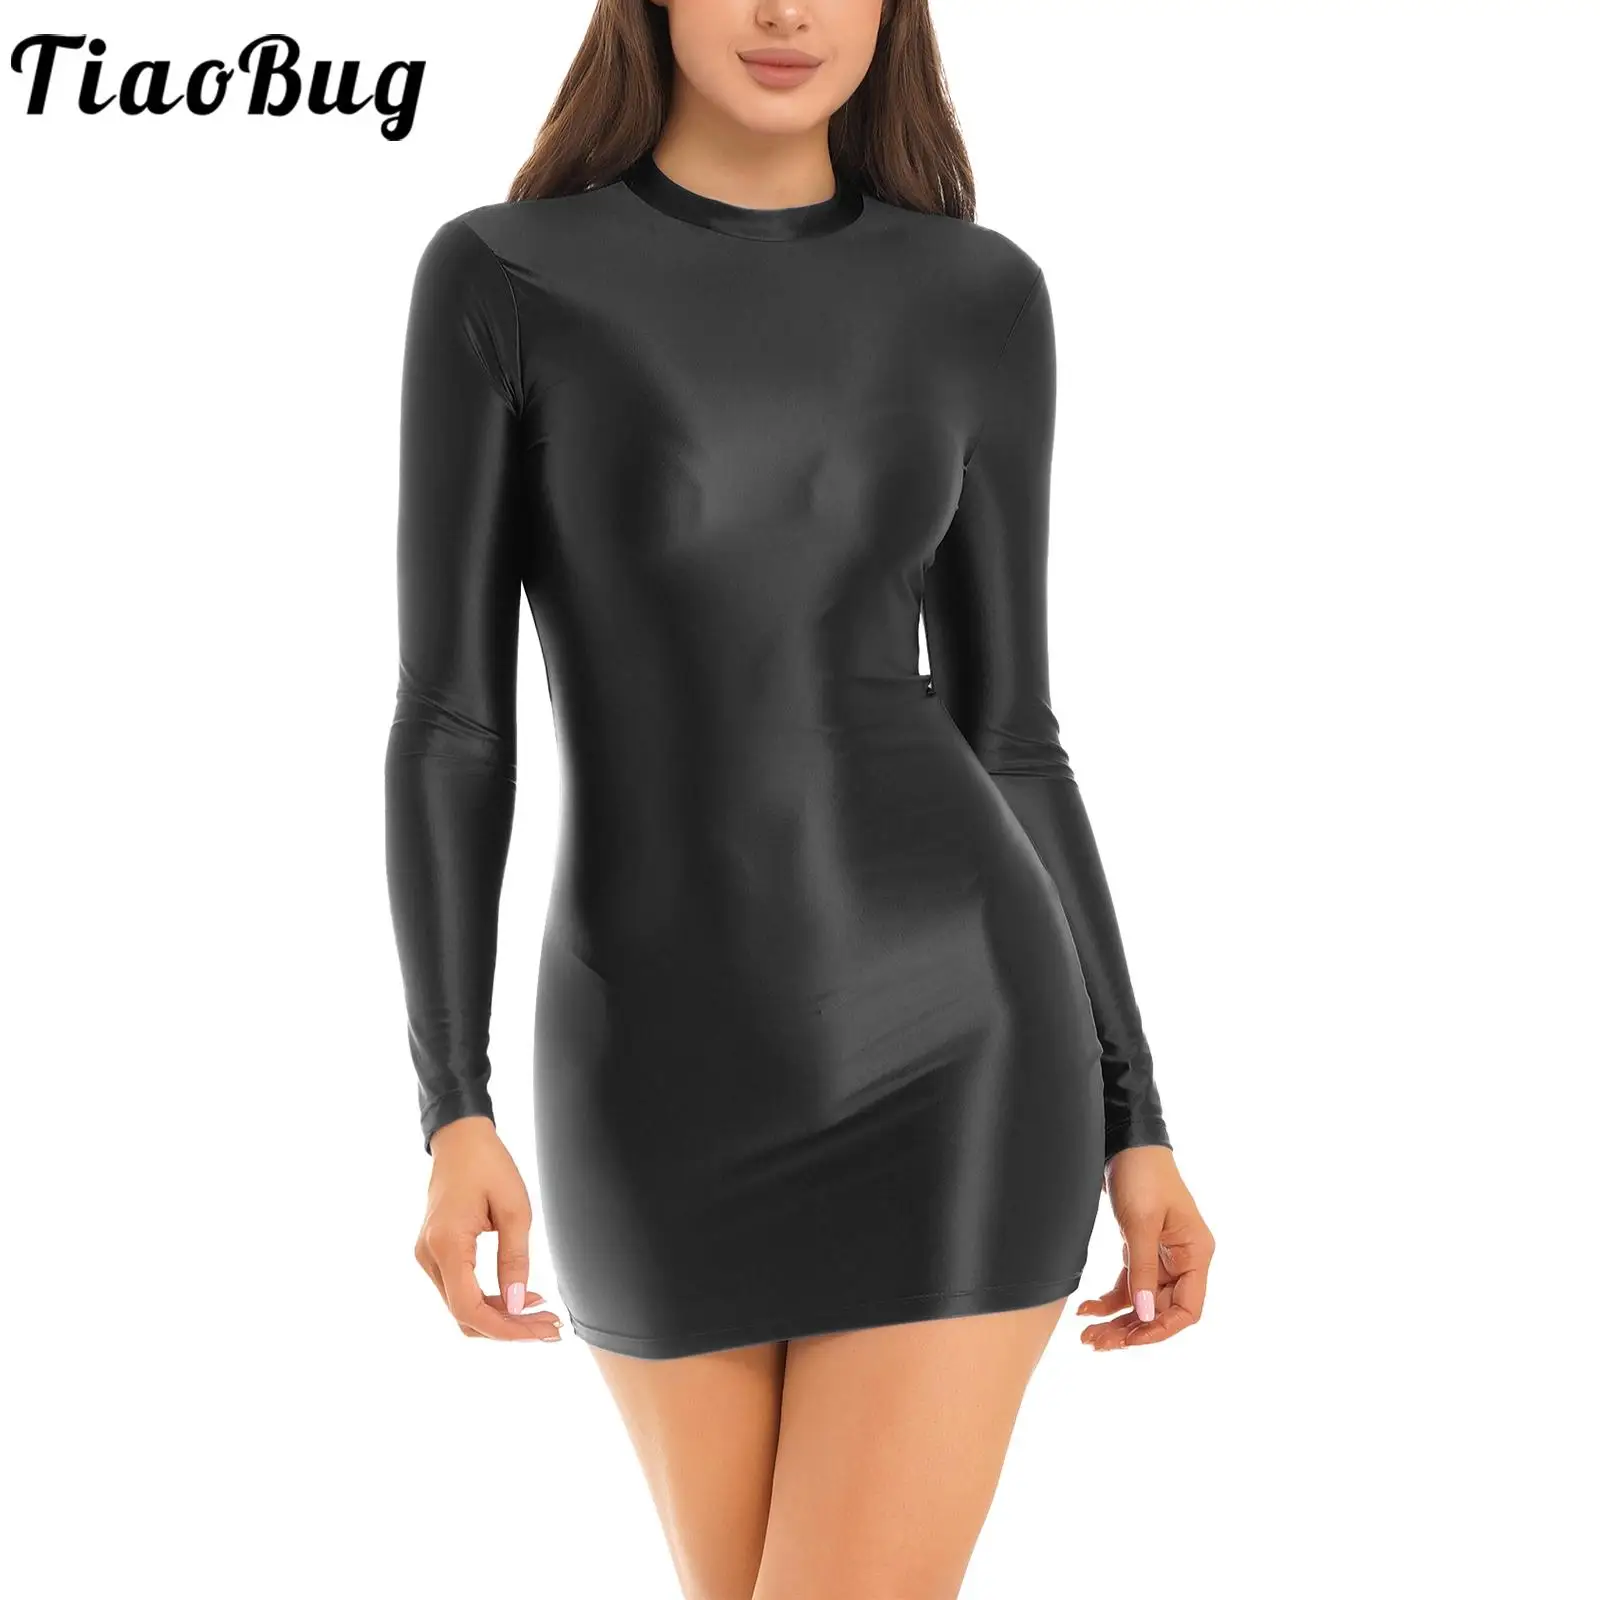 Women Sexy Oil Glossy Micro Mini Dress Tight Party Dress Pencil Bodycon Dress Club Outfit Nightwear Pole Dancing Costume sexy oil glossy shin sheer micro mini dress see through bodycon sexy tight pencil cute dress smooth bandage dress candy color 15